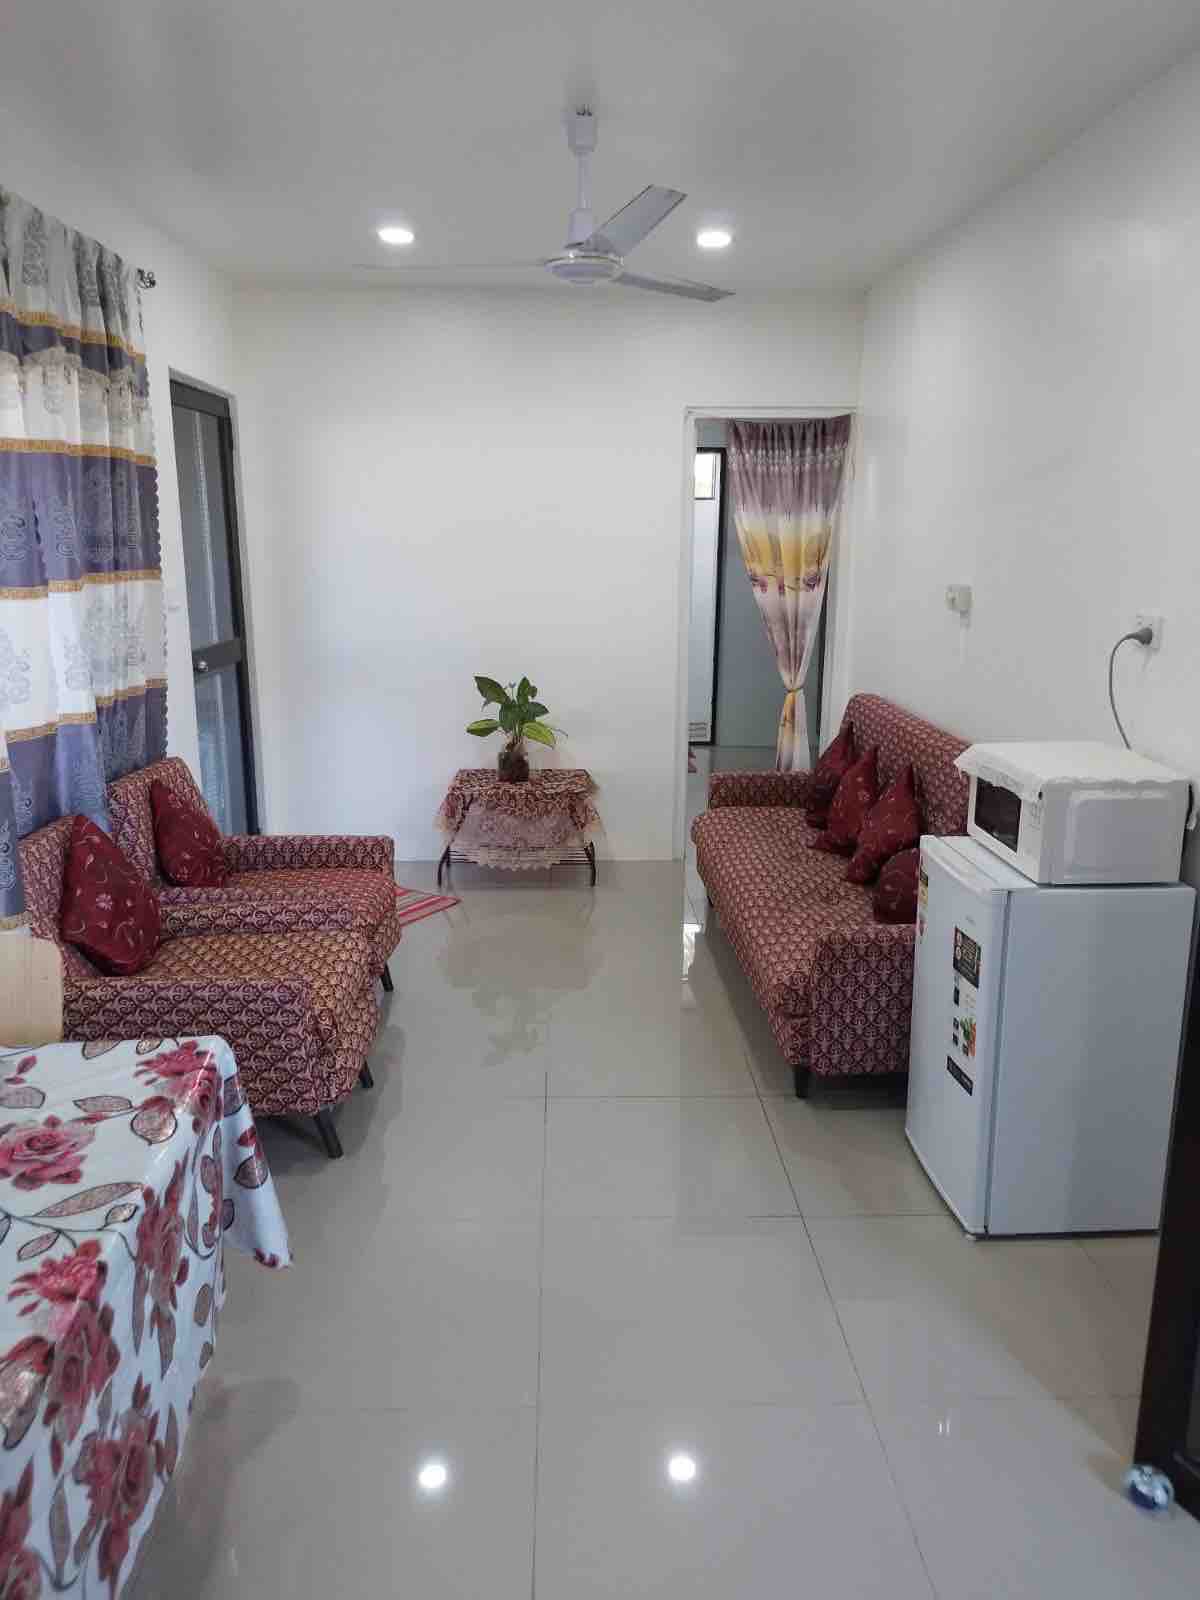 1 bedroom unit centrally located in Votualevu